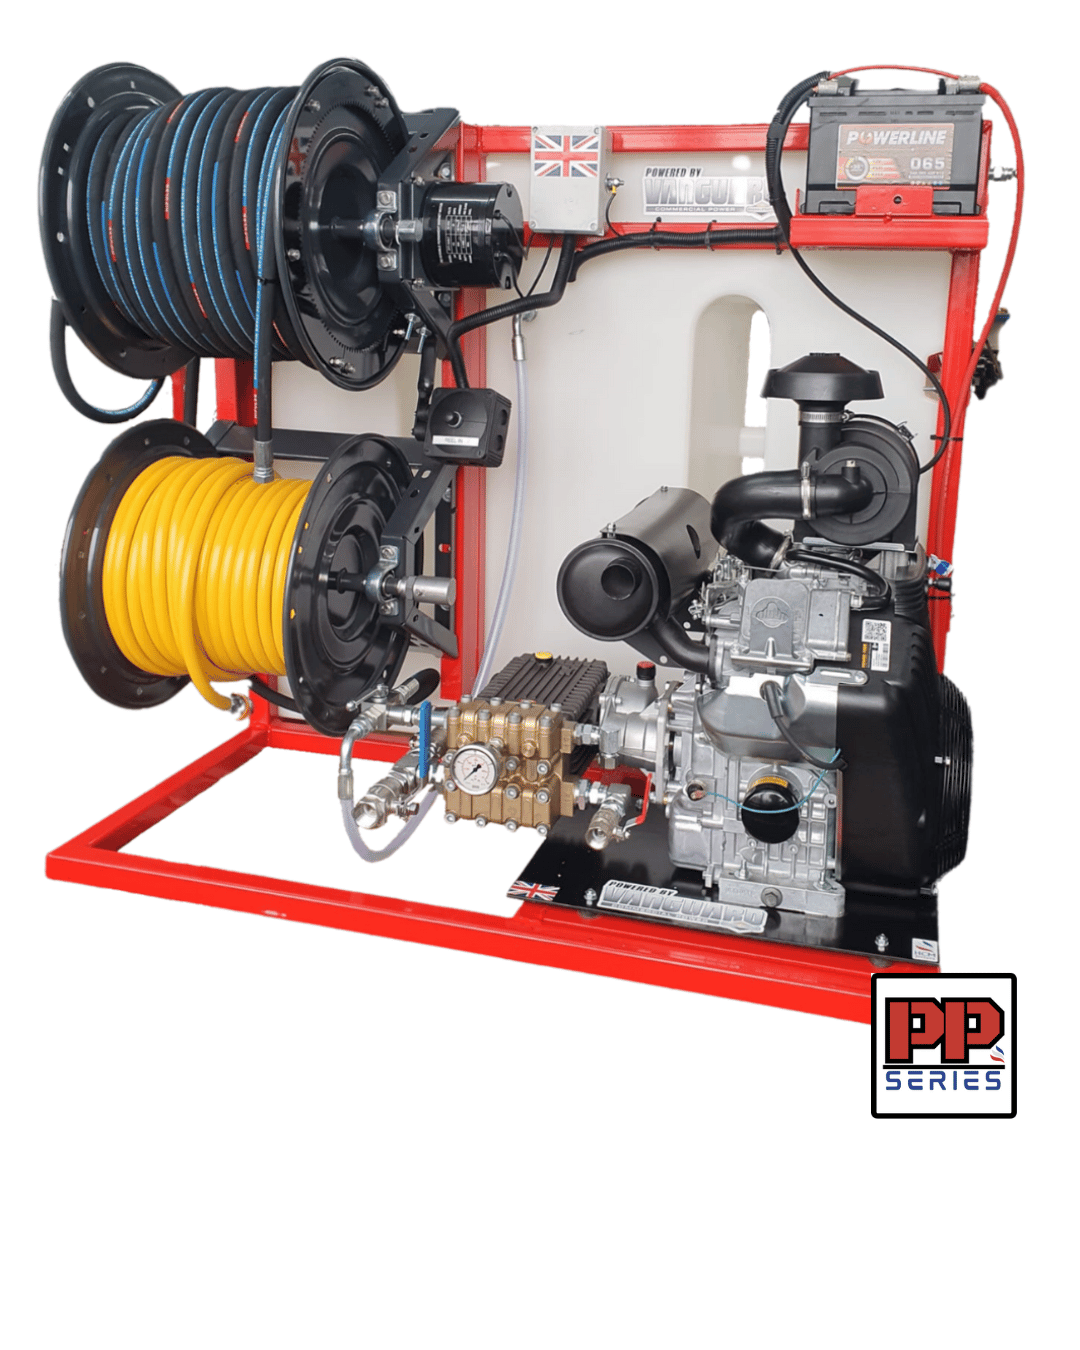 large image of a HCM Jetters 800 Series PowerPlate Drain Jetting unit vanpack system for drain cleaning, desilting and root cutting. The drain jetter has Electric reels, remote system and drain jets.